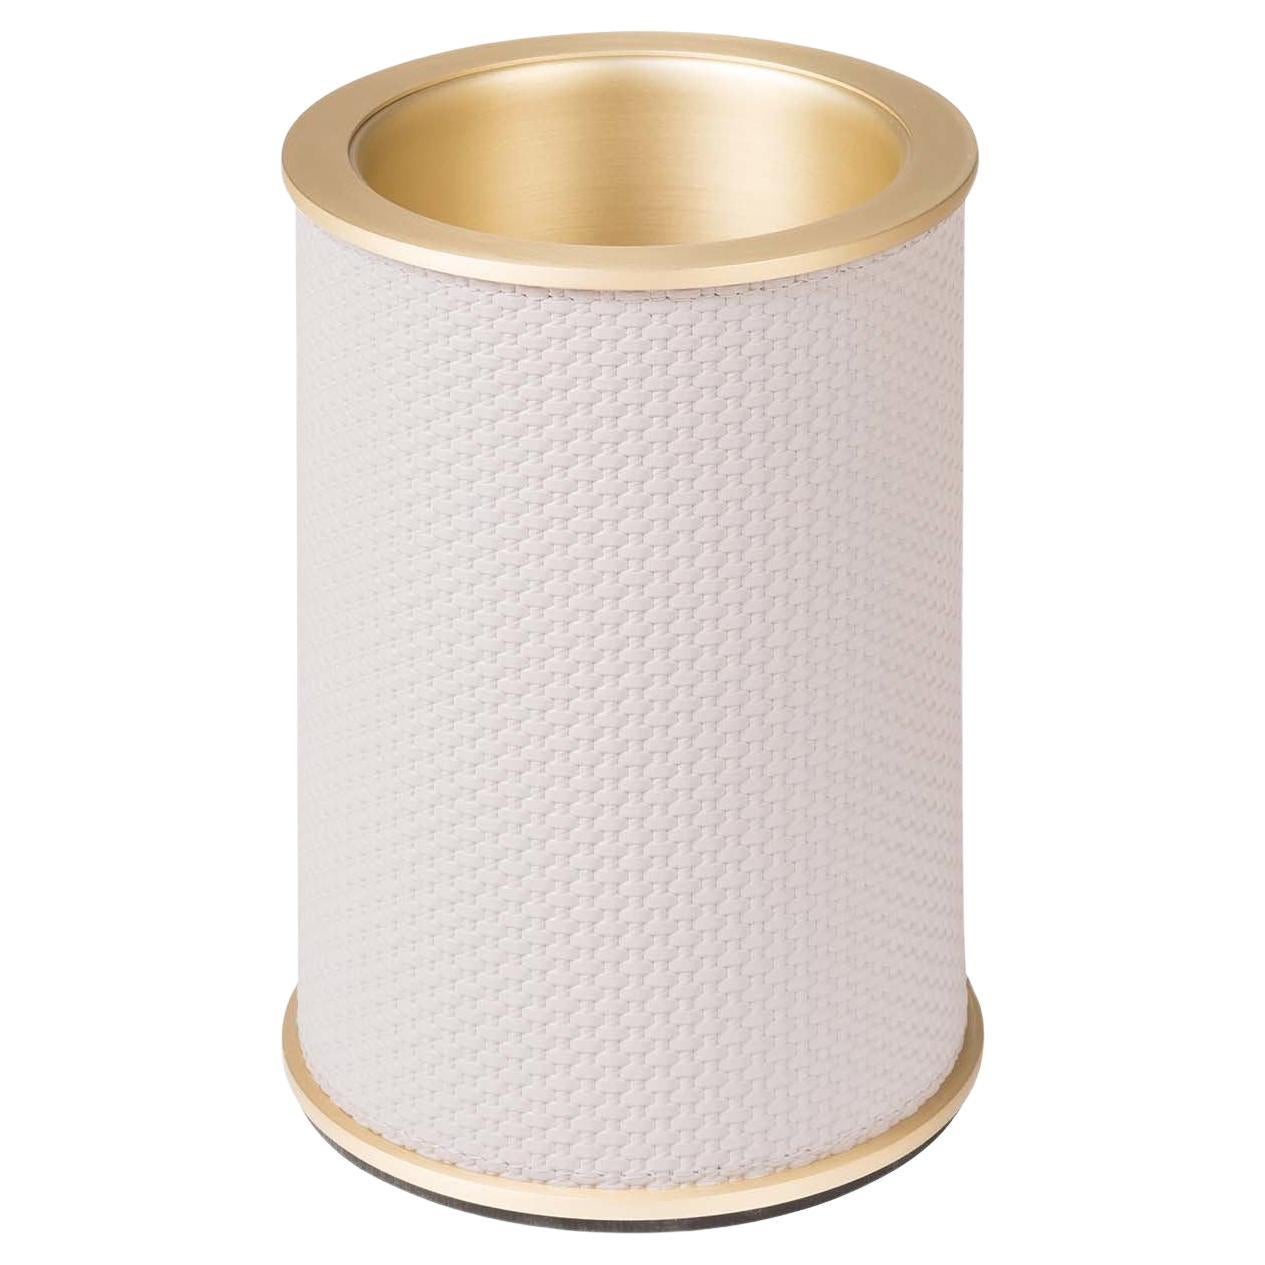 Positano White and Gold Bottle Cooler